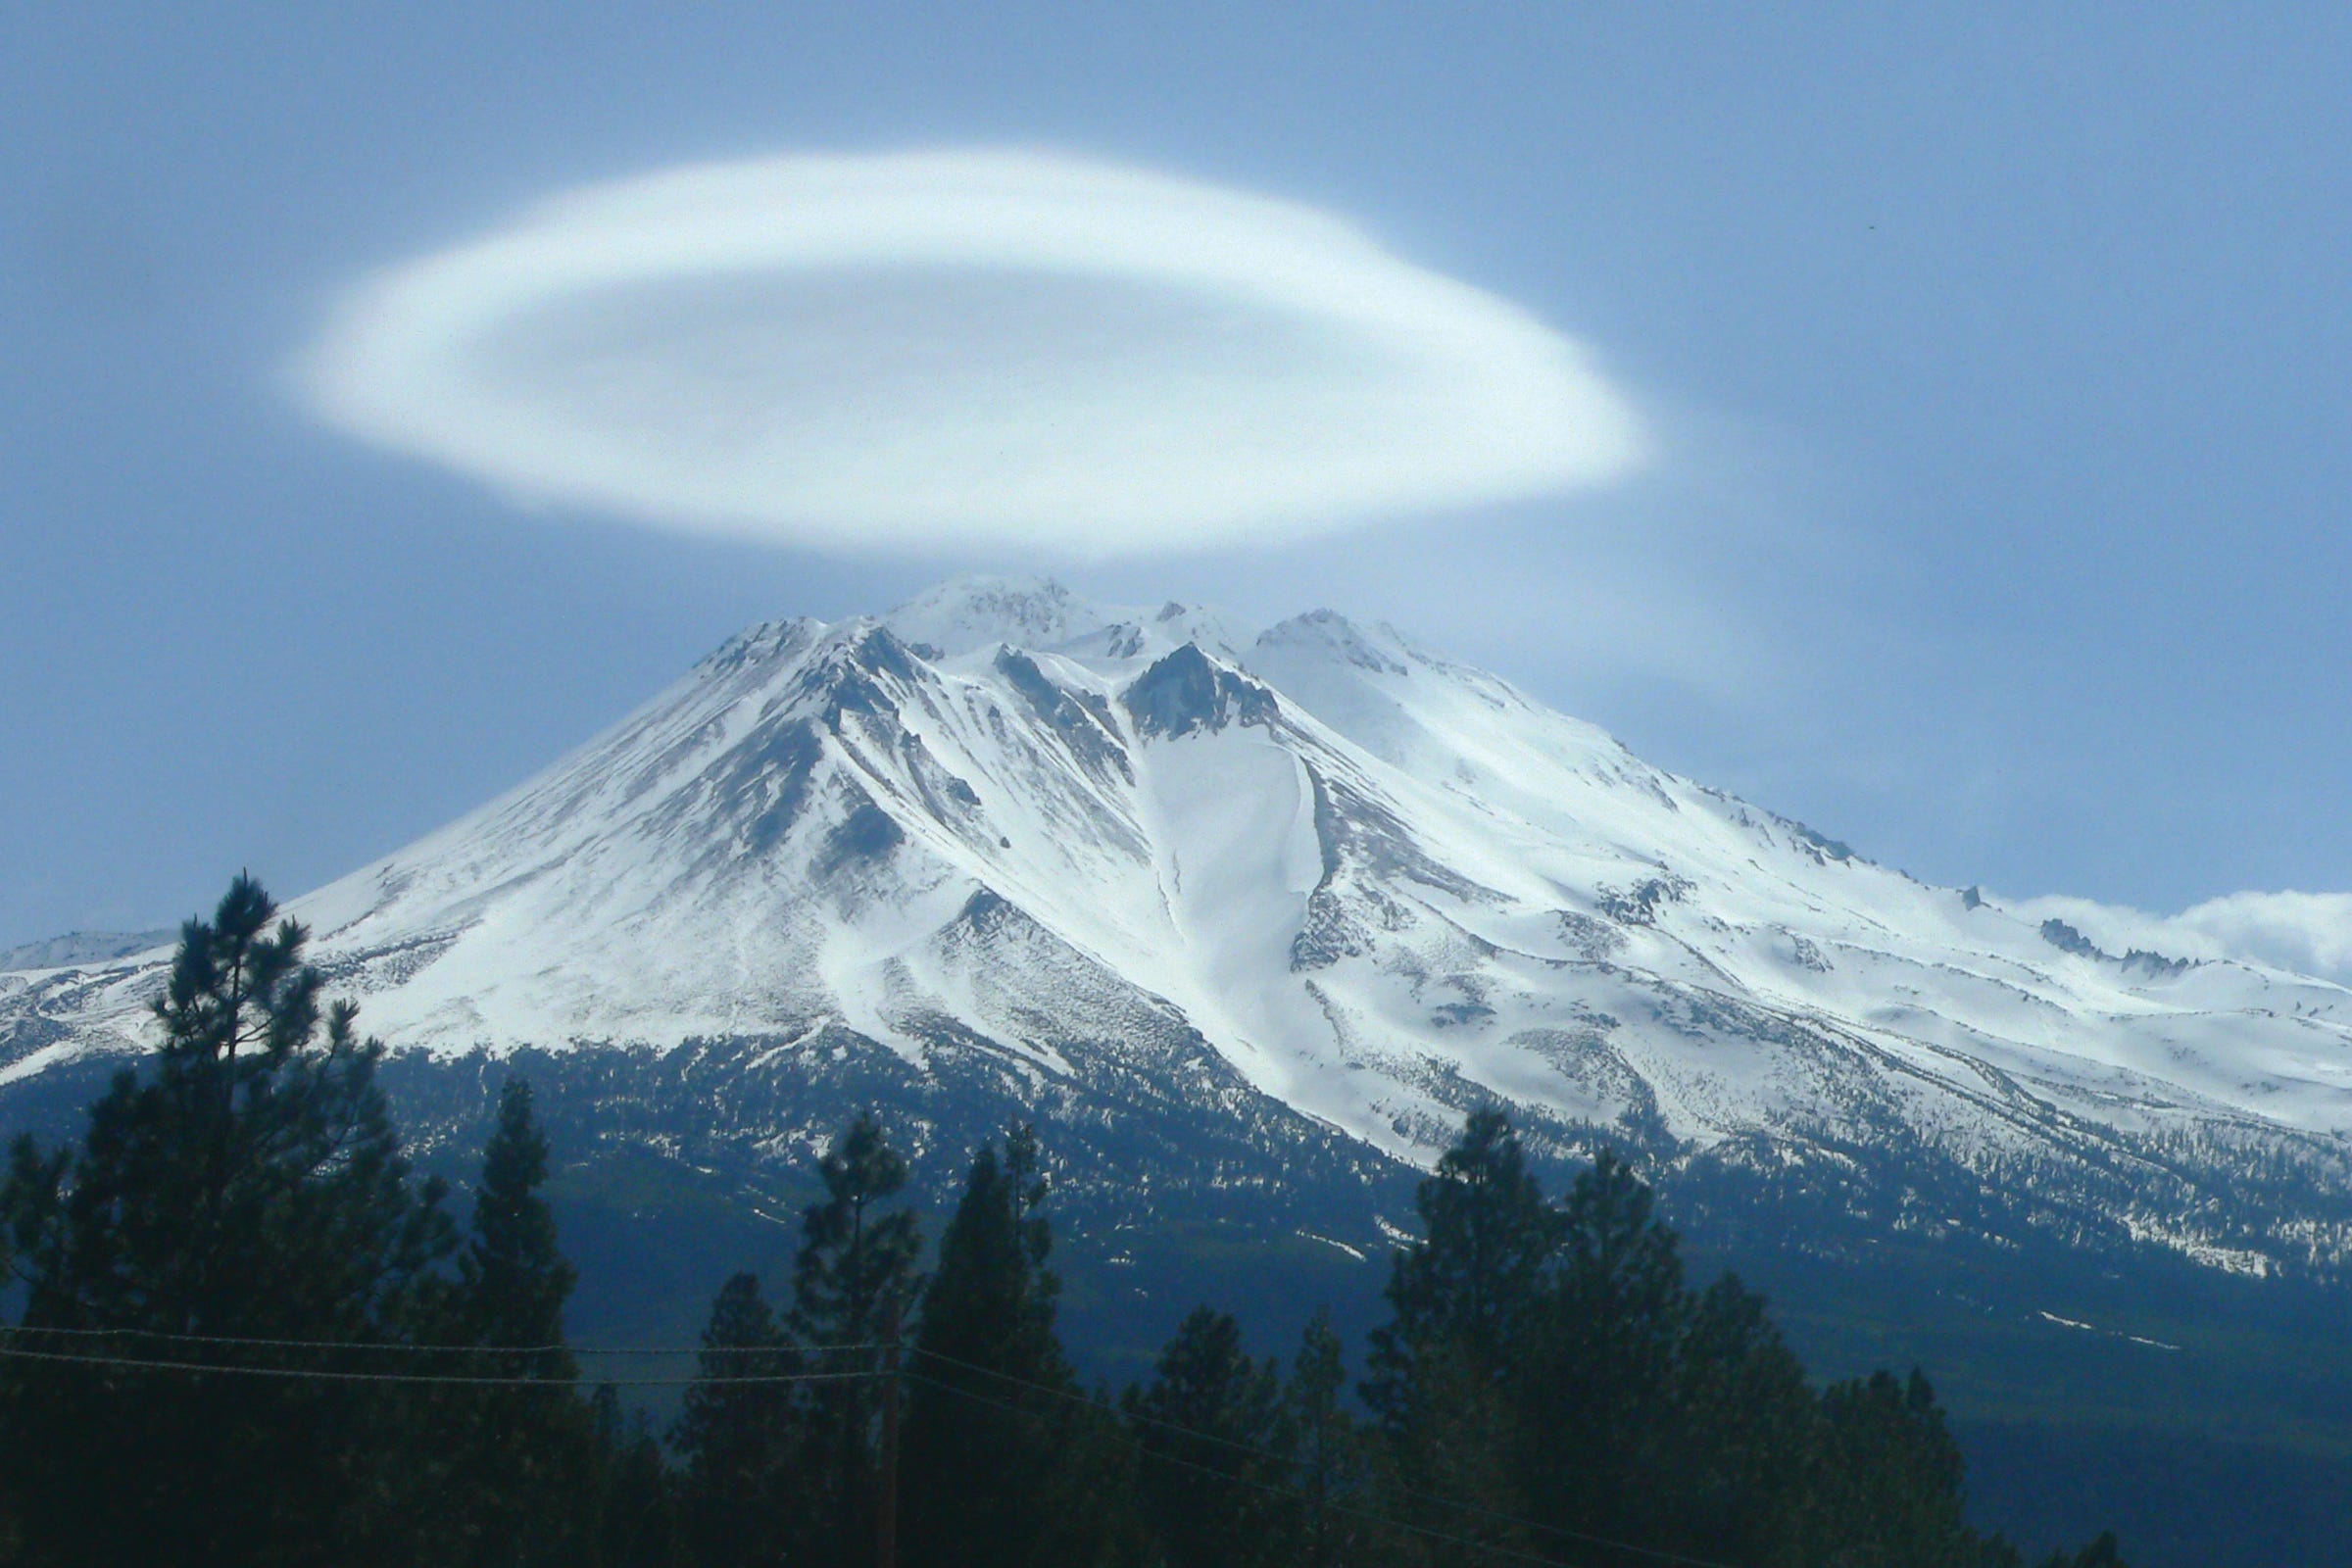 A lenticular over "The Heart of Mt. Shasta."